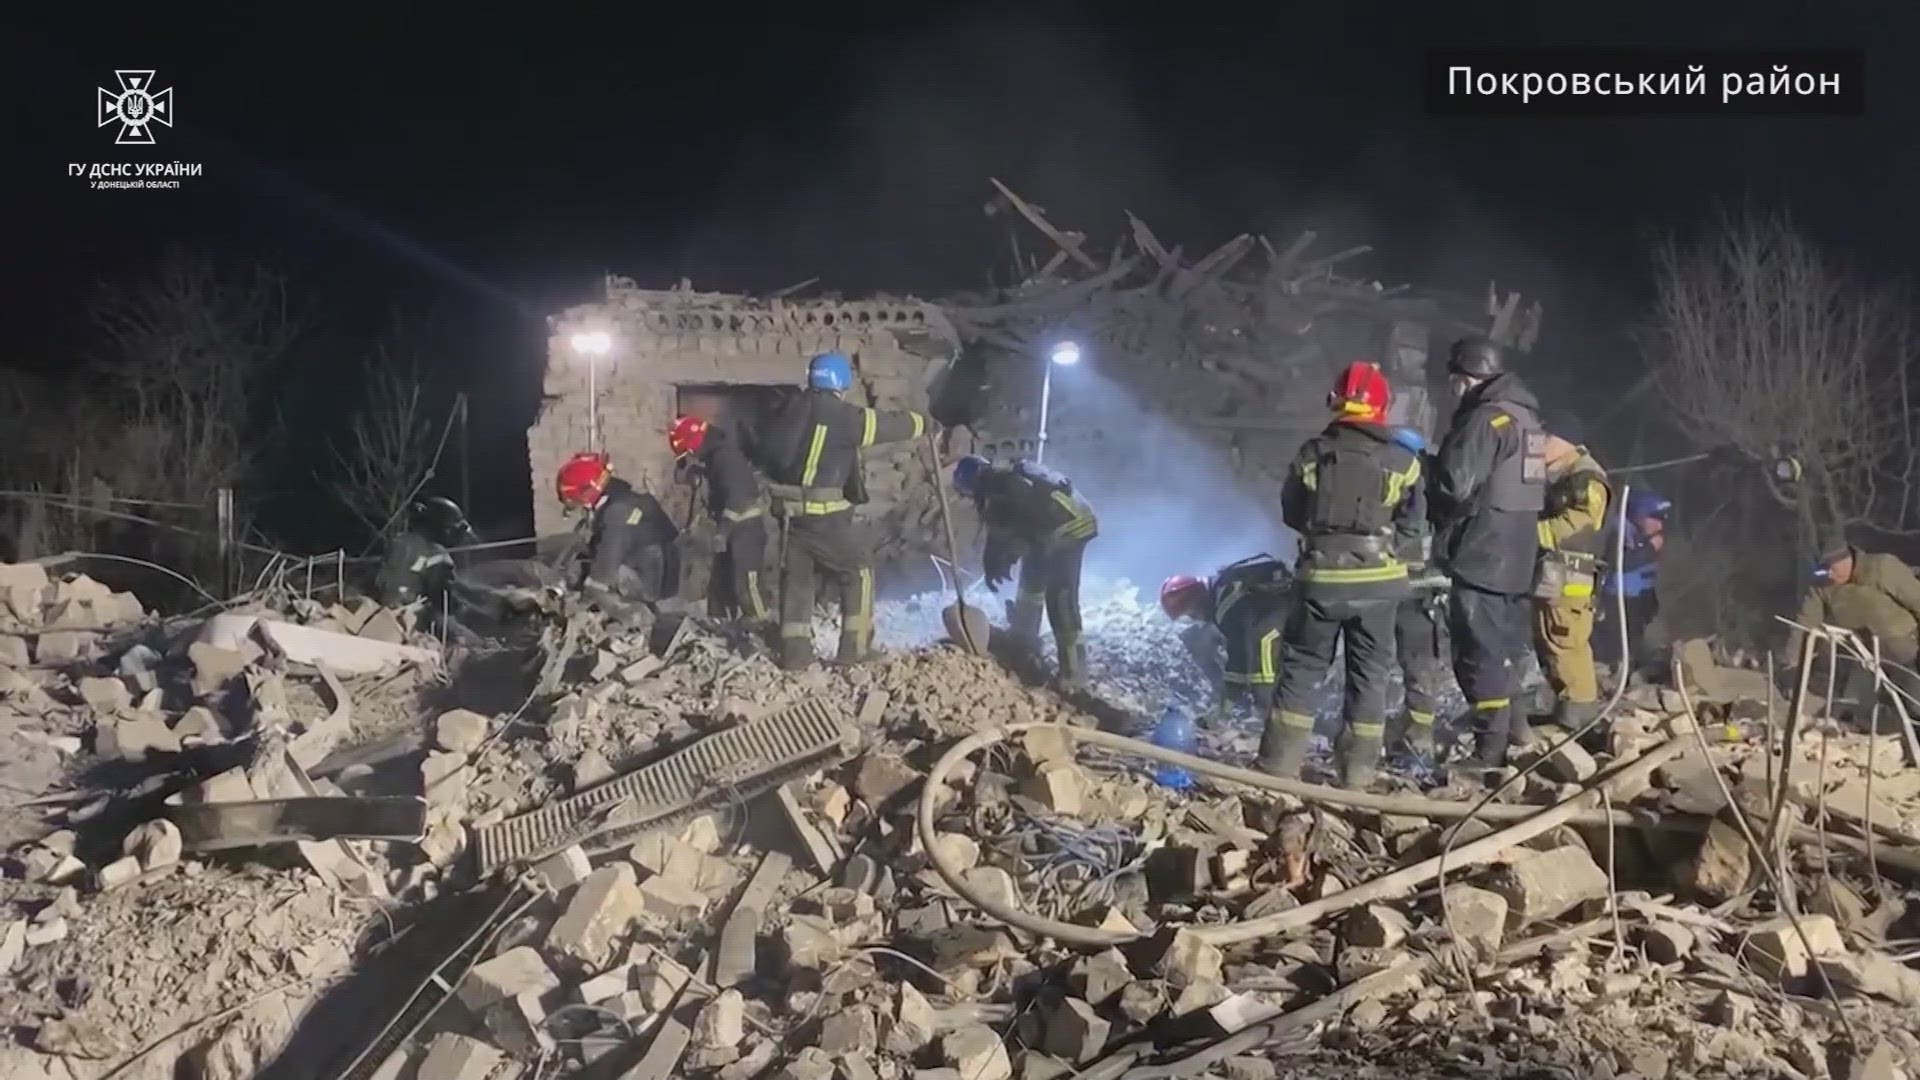 The latest strikes killed 11 people, five of them children according to Ukraine officials.